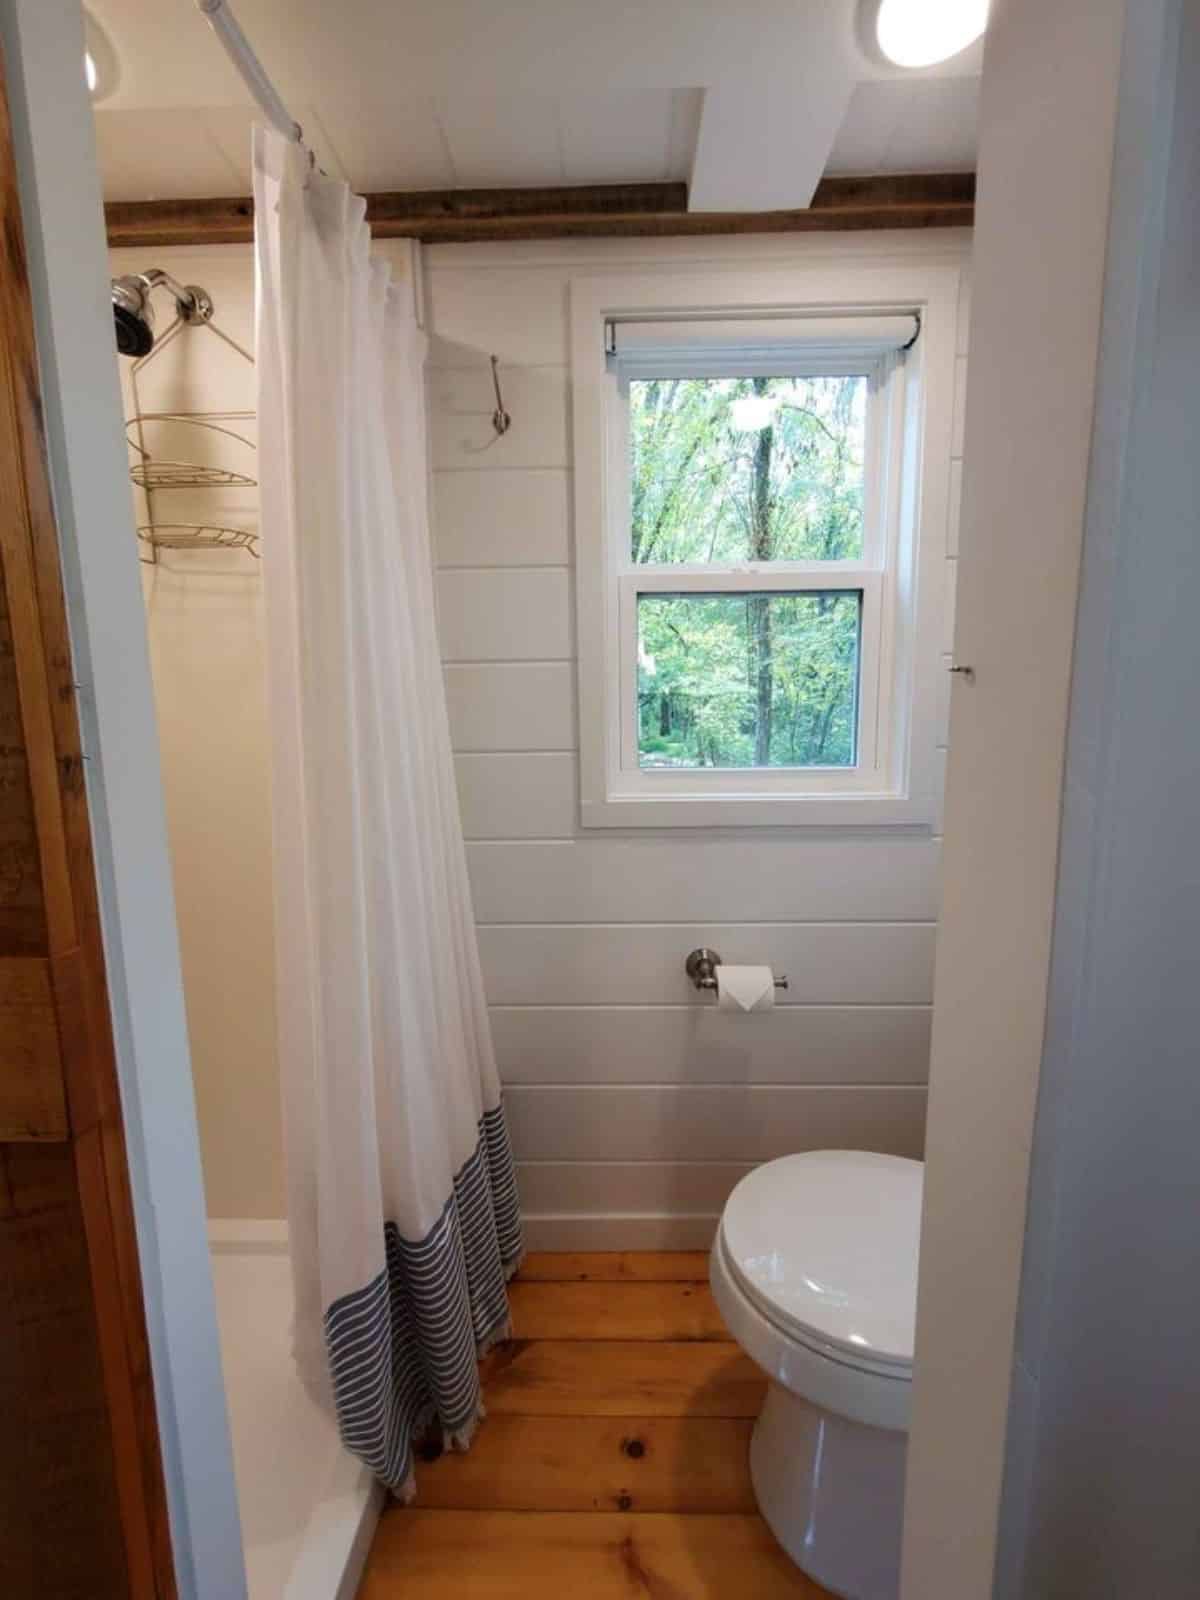 shower cubicle with curtain in bathroom